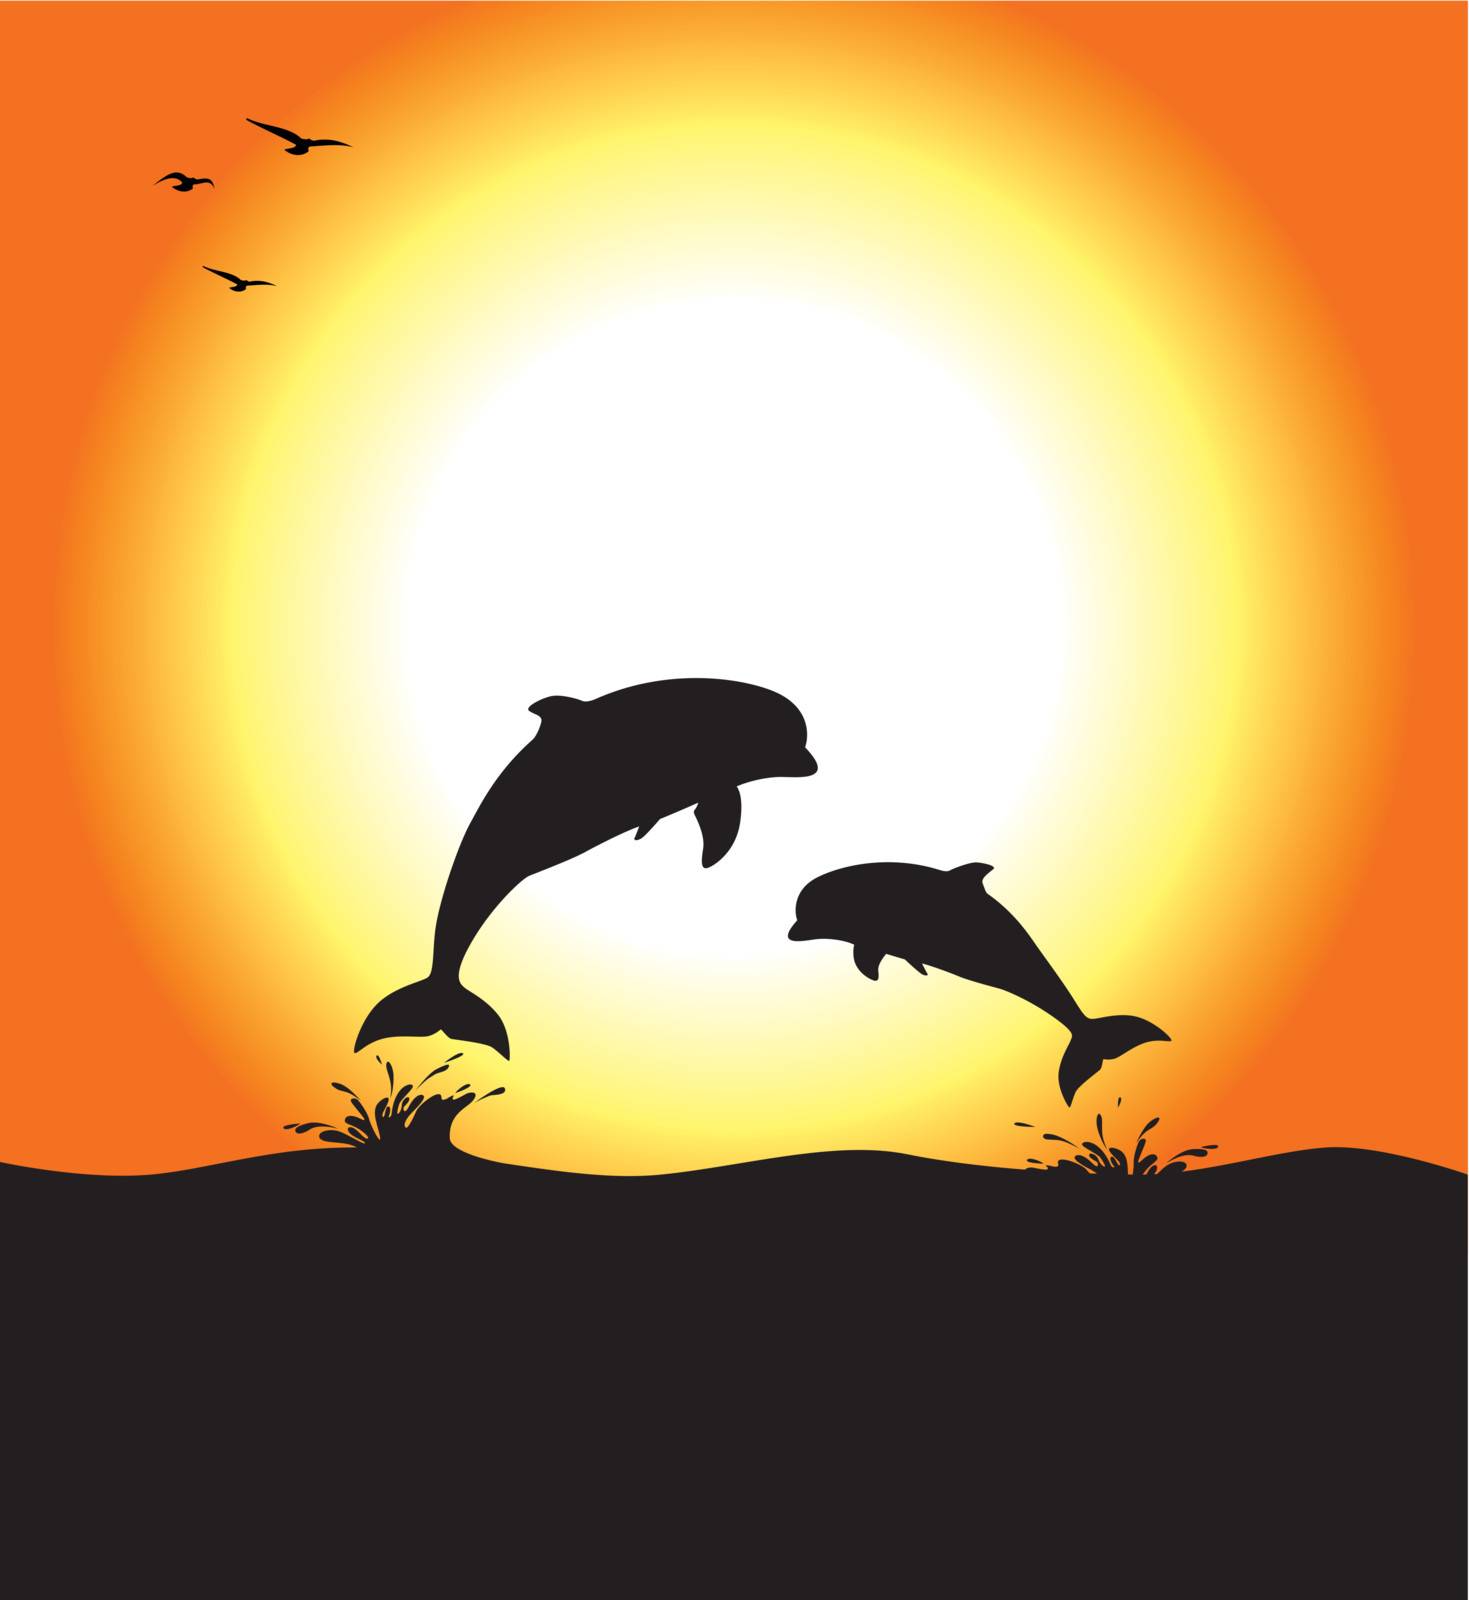 Two dolphins jumping, at sunset, with birds. Editable vector illustration.